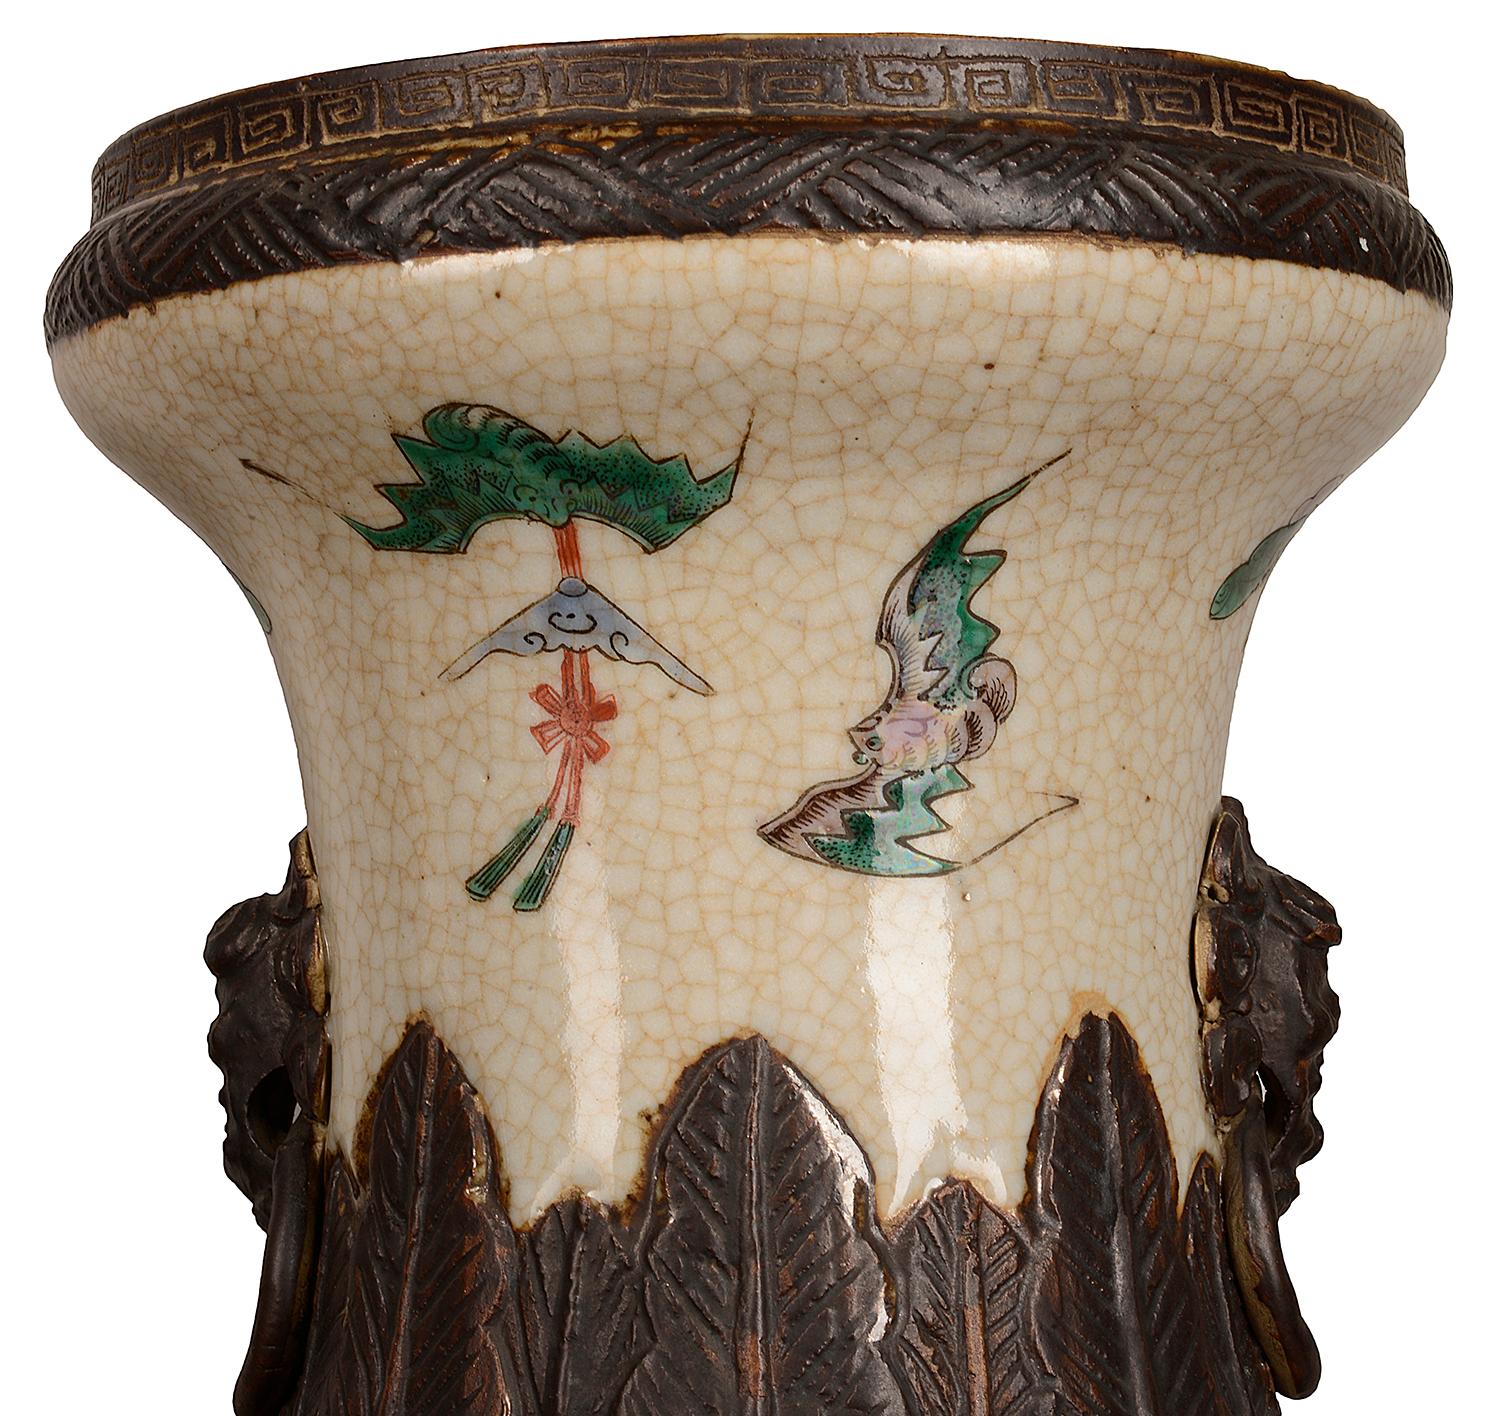 Chinese Export Pair of 19th Century Chinese Crackle-Ware Vases / Lamps